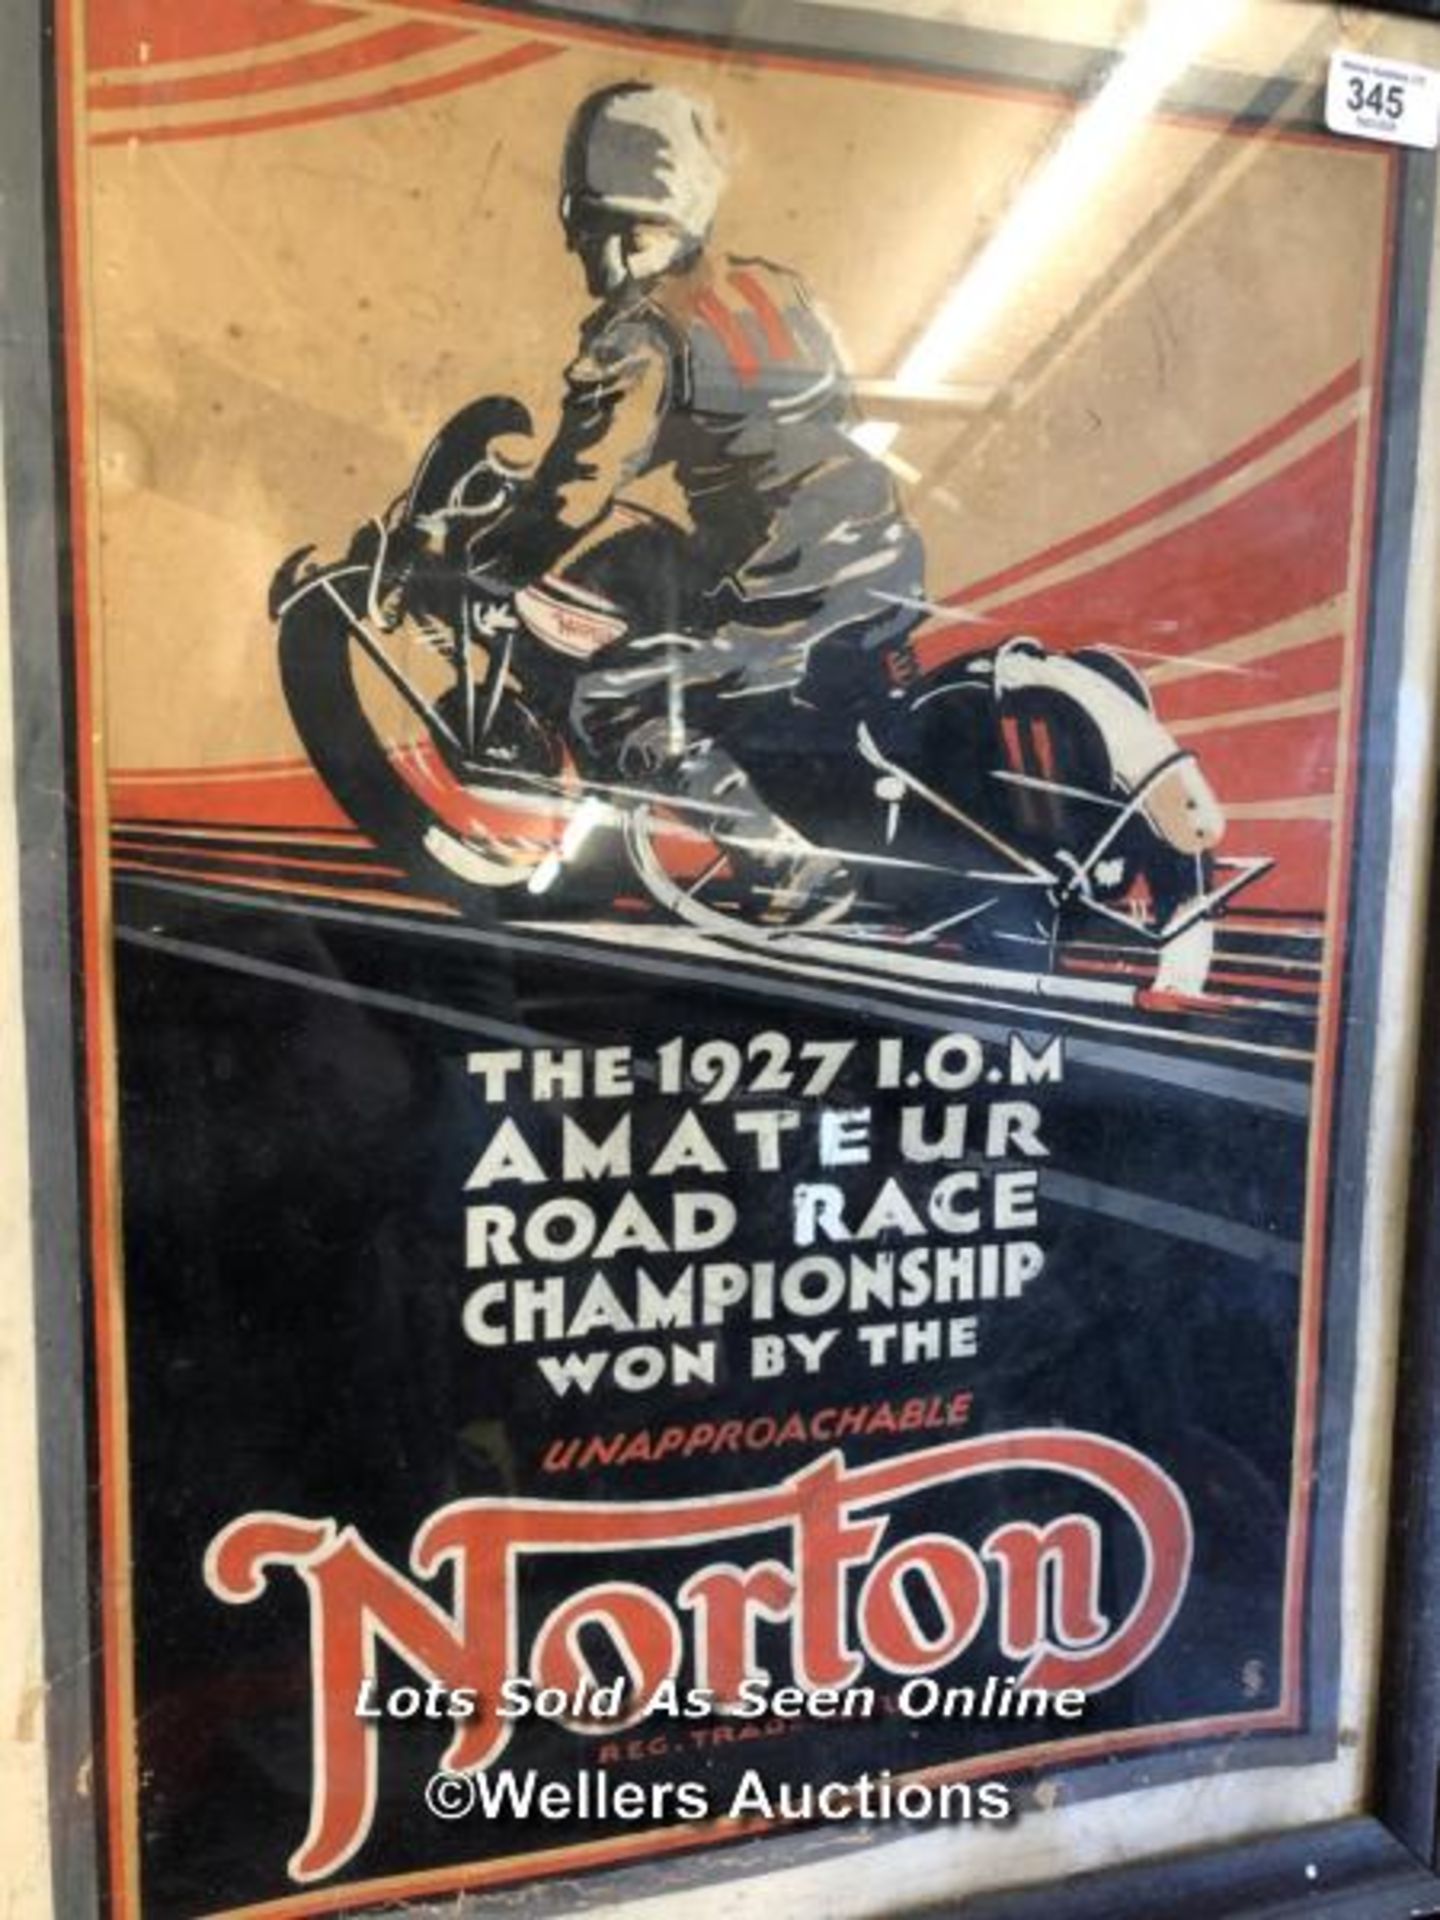 FRAMED AND GLAZED HAND FINISHED POSTER FOR NORTON MOTORBIKES - THE 1927 I.O.M. AMATEUR ROAD RACE - Image 2 of 4